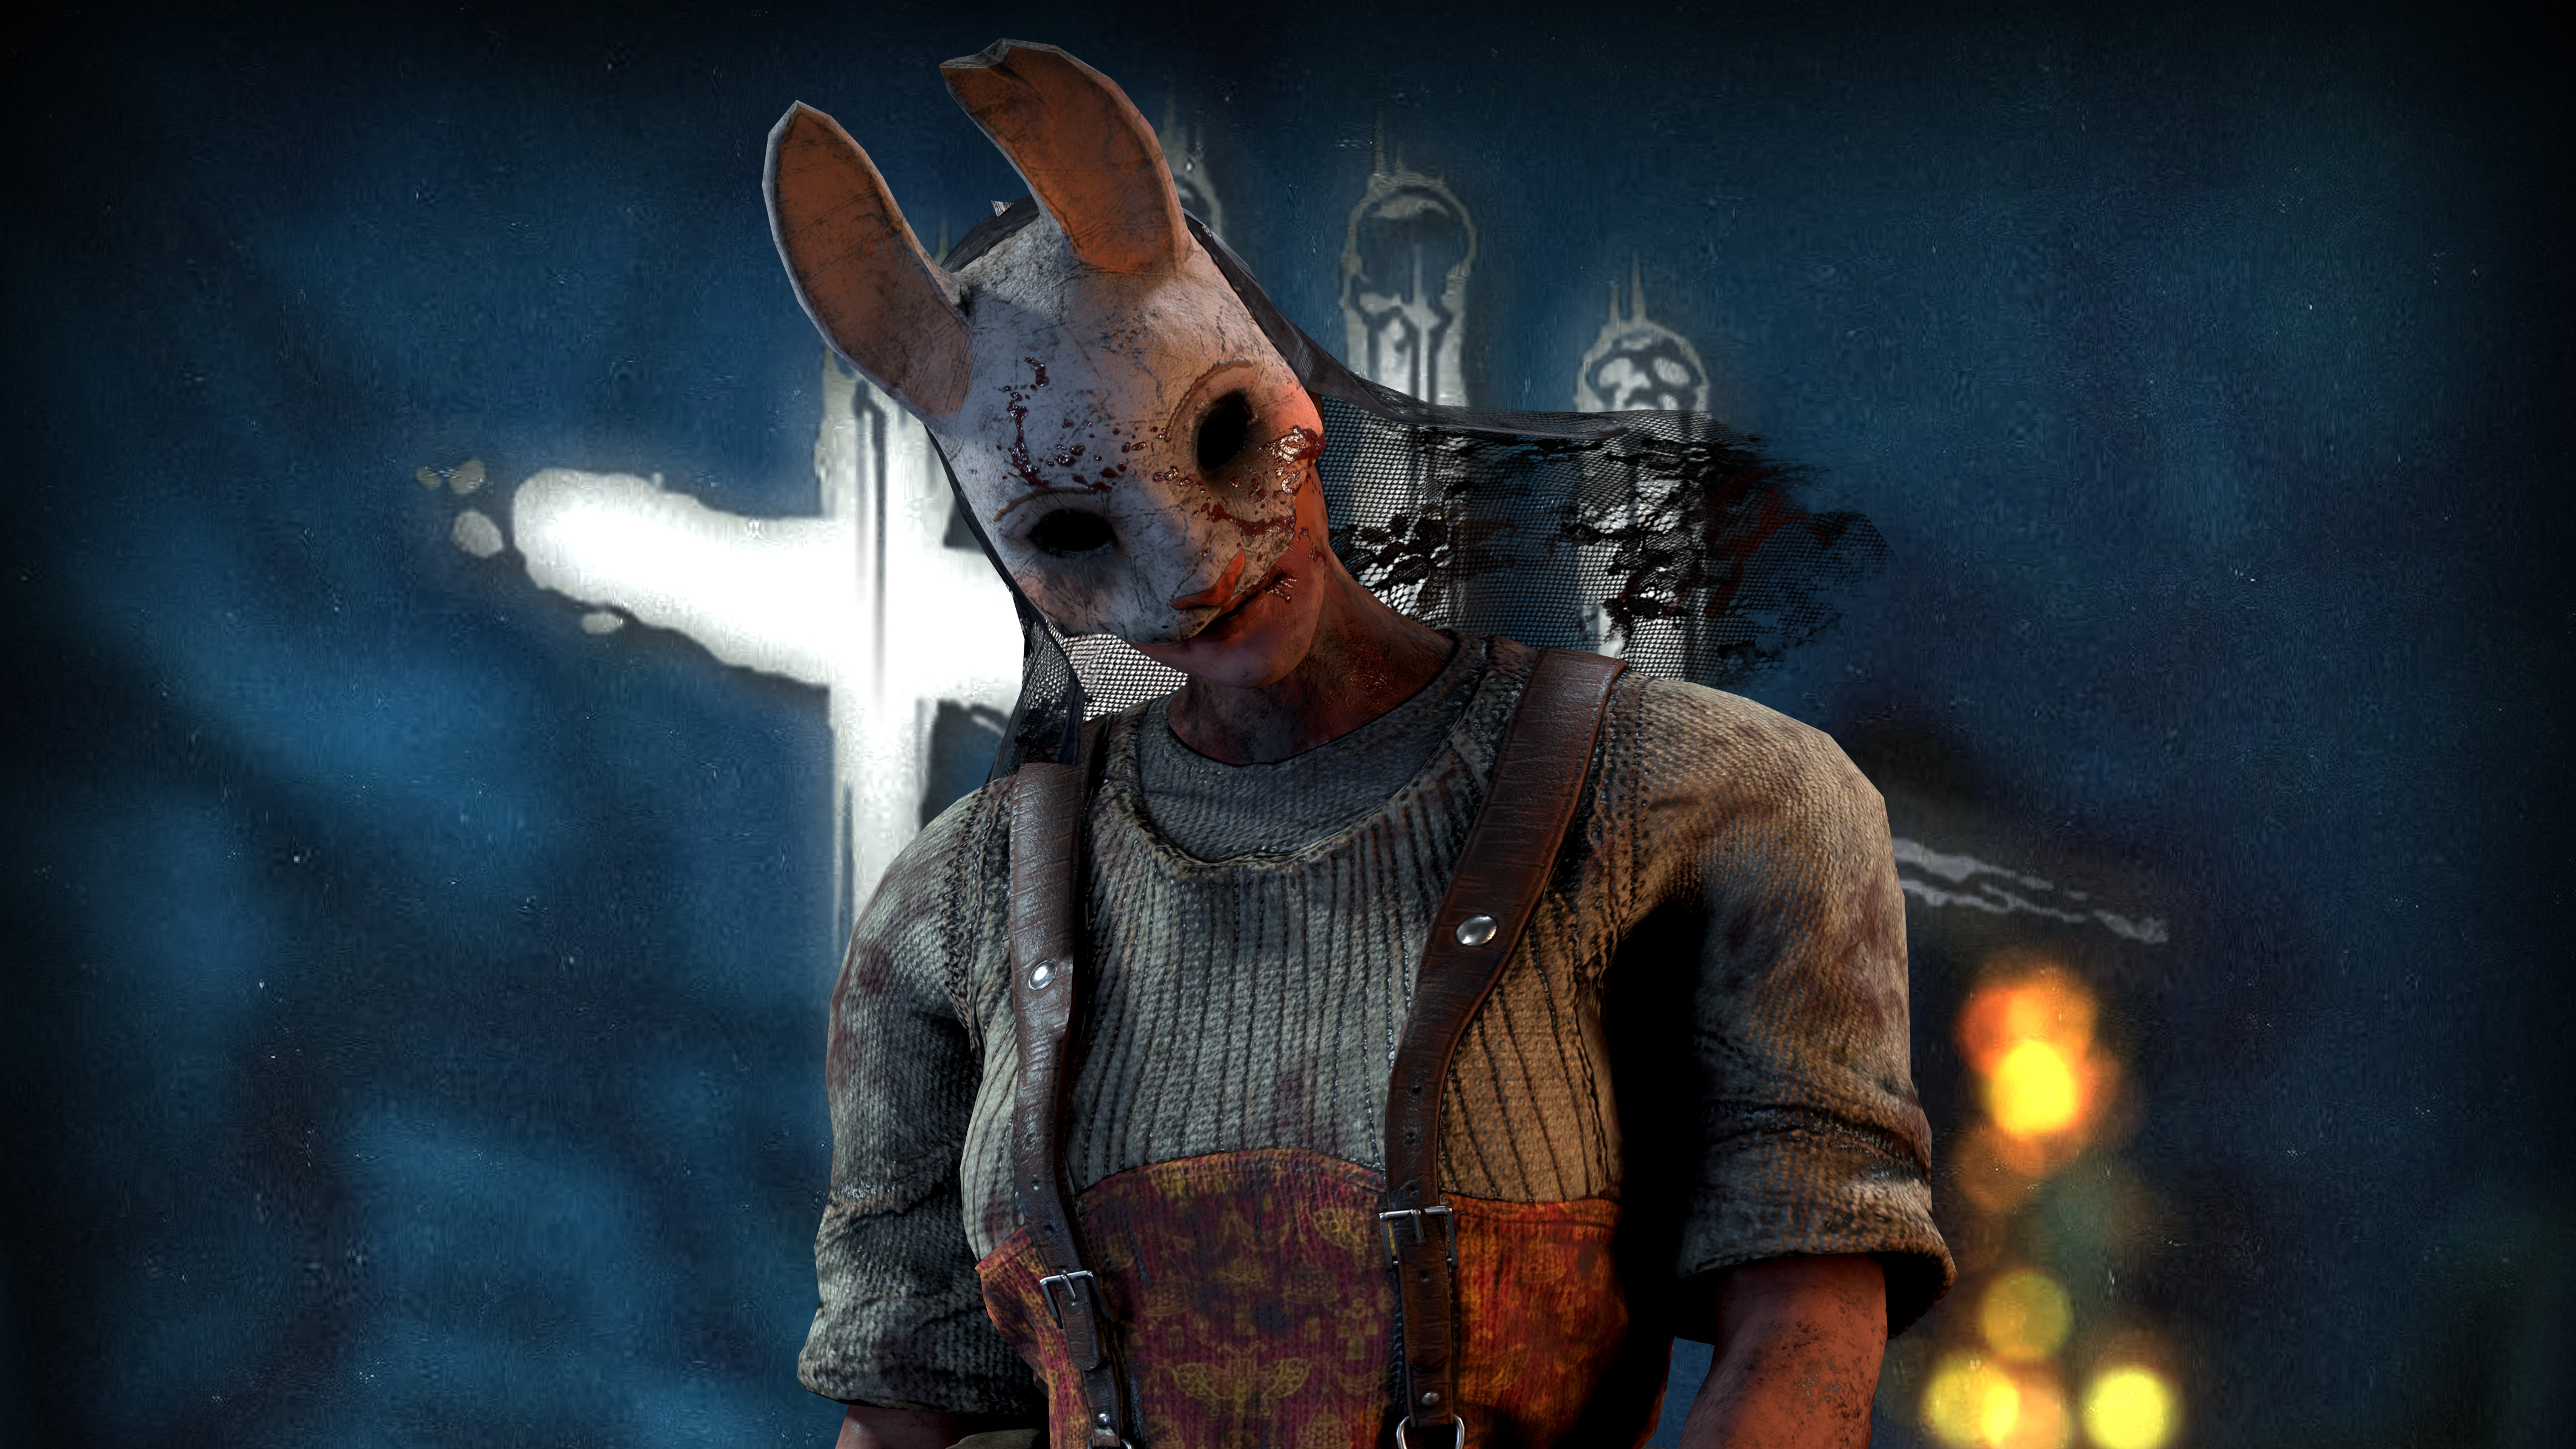 Wallpapers dead by daylight games games 2019 on the desktop